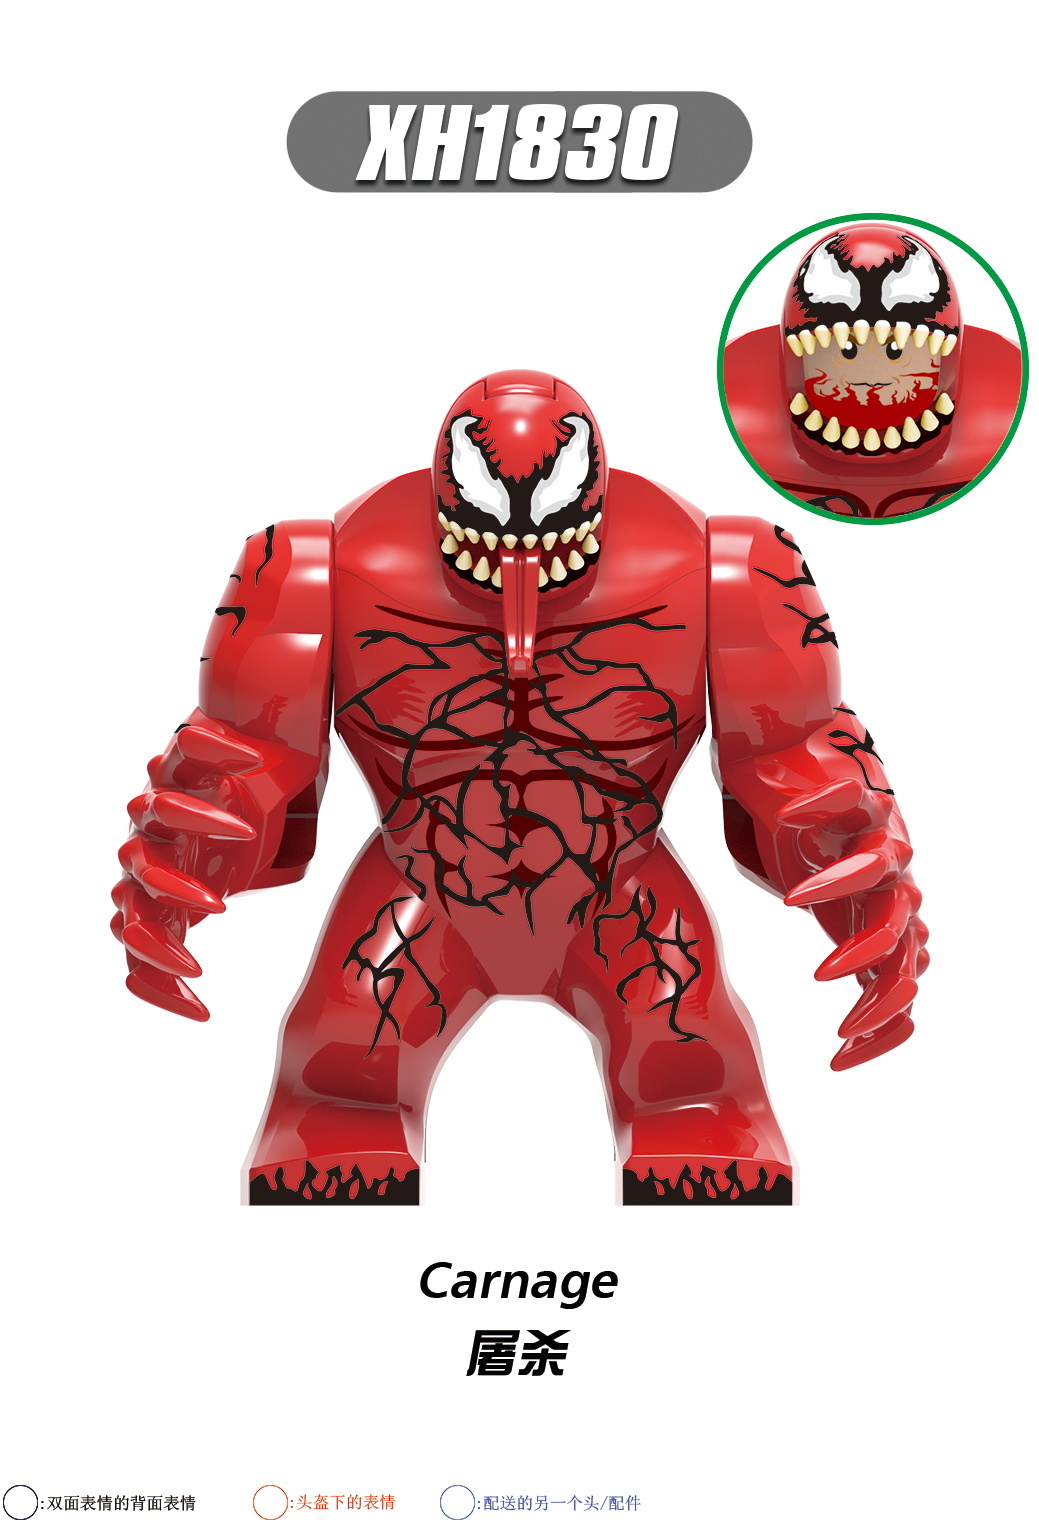 XH1828 XH1829 XH1830 XH1831 XH1832 X0327 Big Model Super Heroes Lizard Venom Carnage Movie Series Building Blocks Action Figures Educational Toys For Kids Gifts